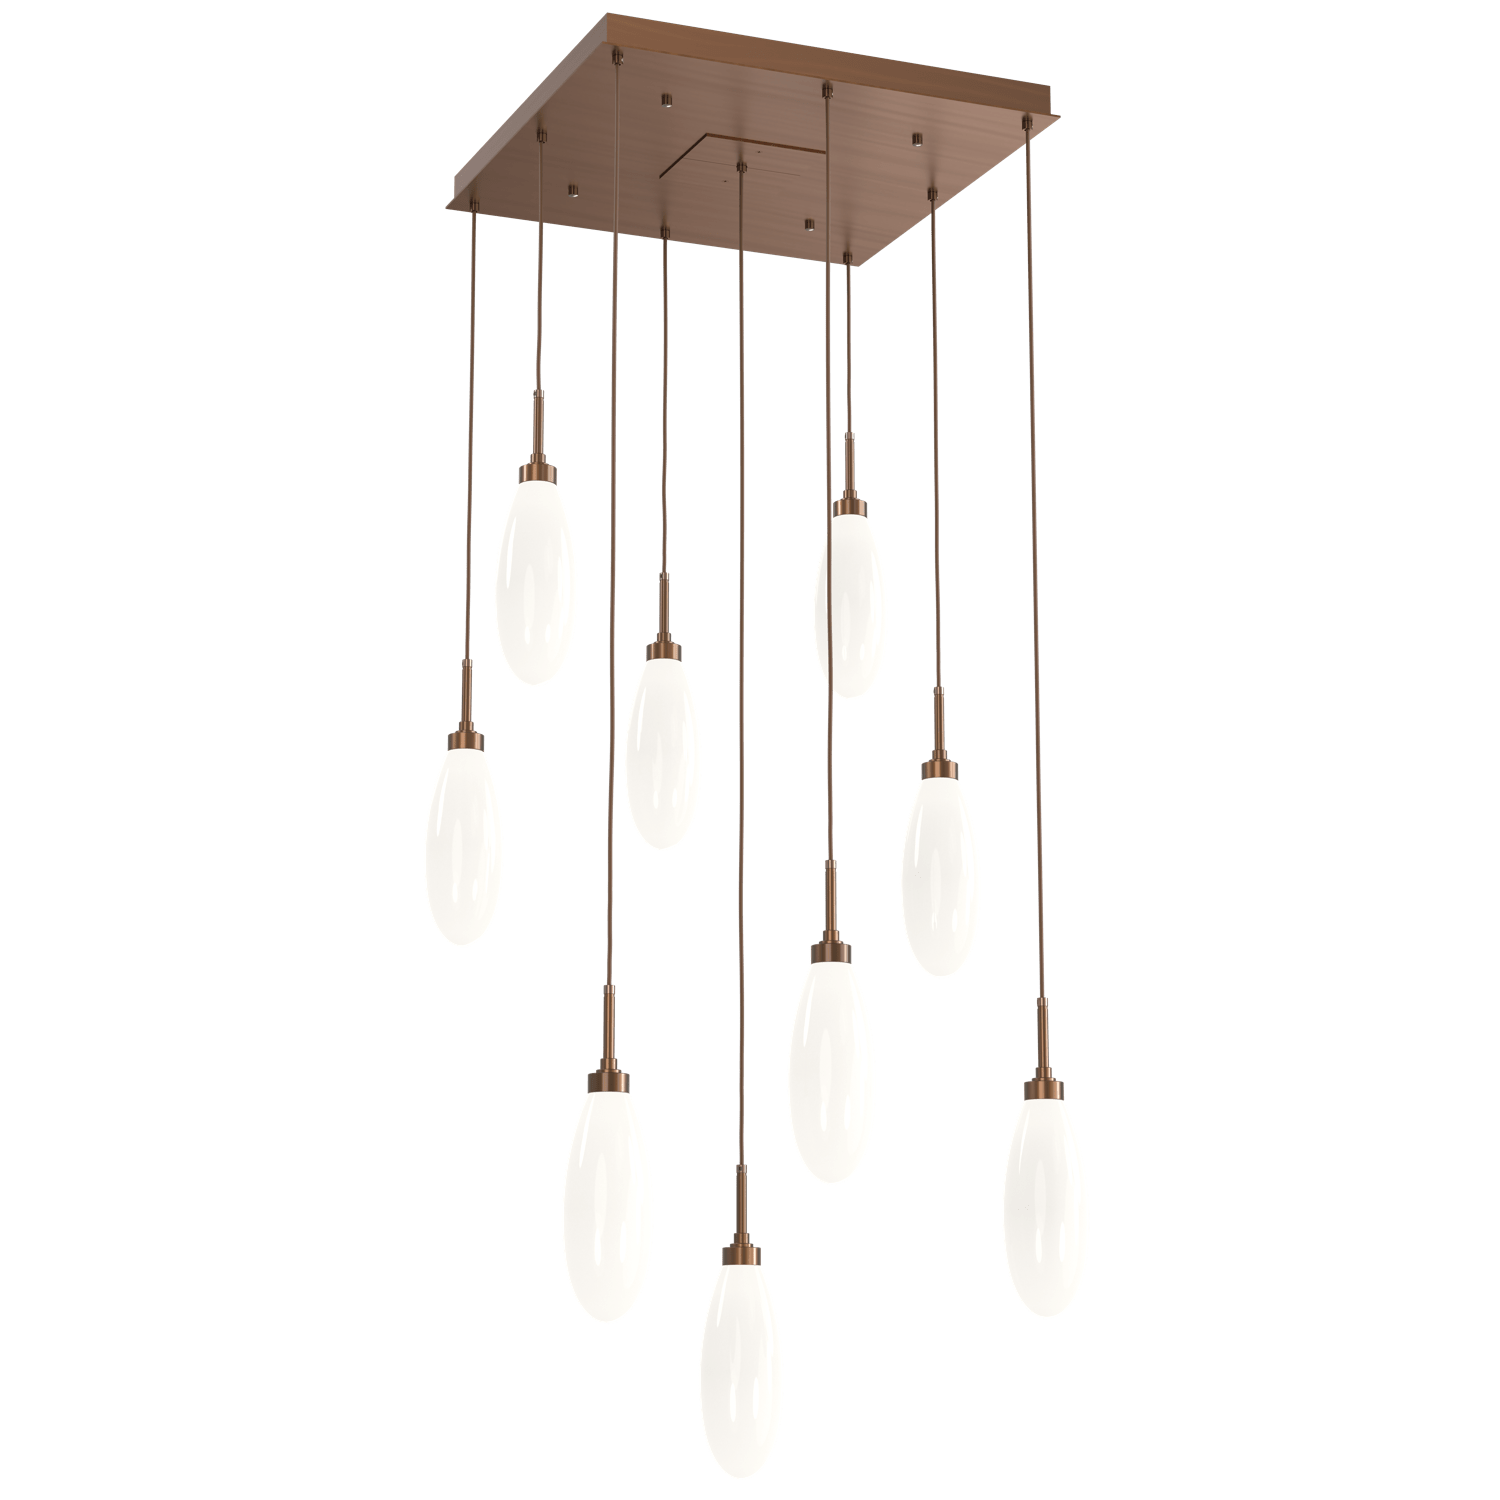 CHB0071-09-RB-WL-LL-Hammerton-Studio-Fiori-9-light-square-pendant-chandelier-with-oil-rubbed-bronze-finish-and-opal-white-glass-shades-and-LED-lamping